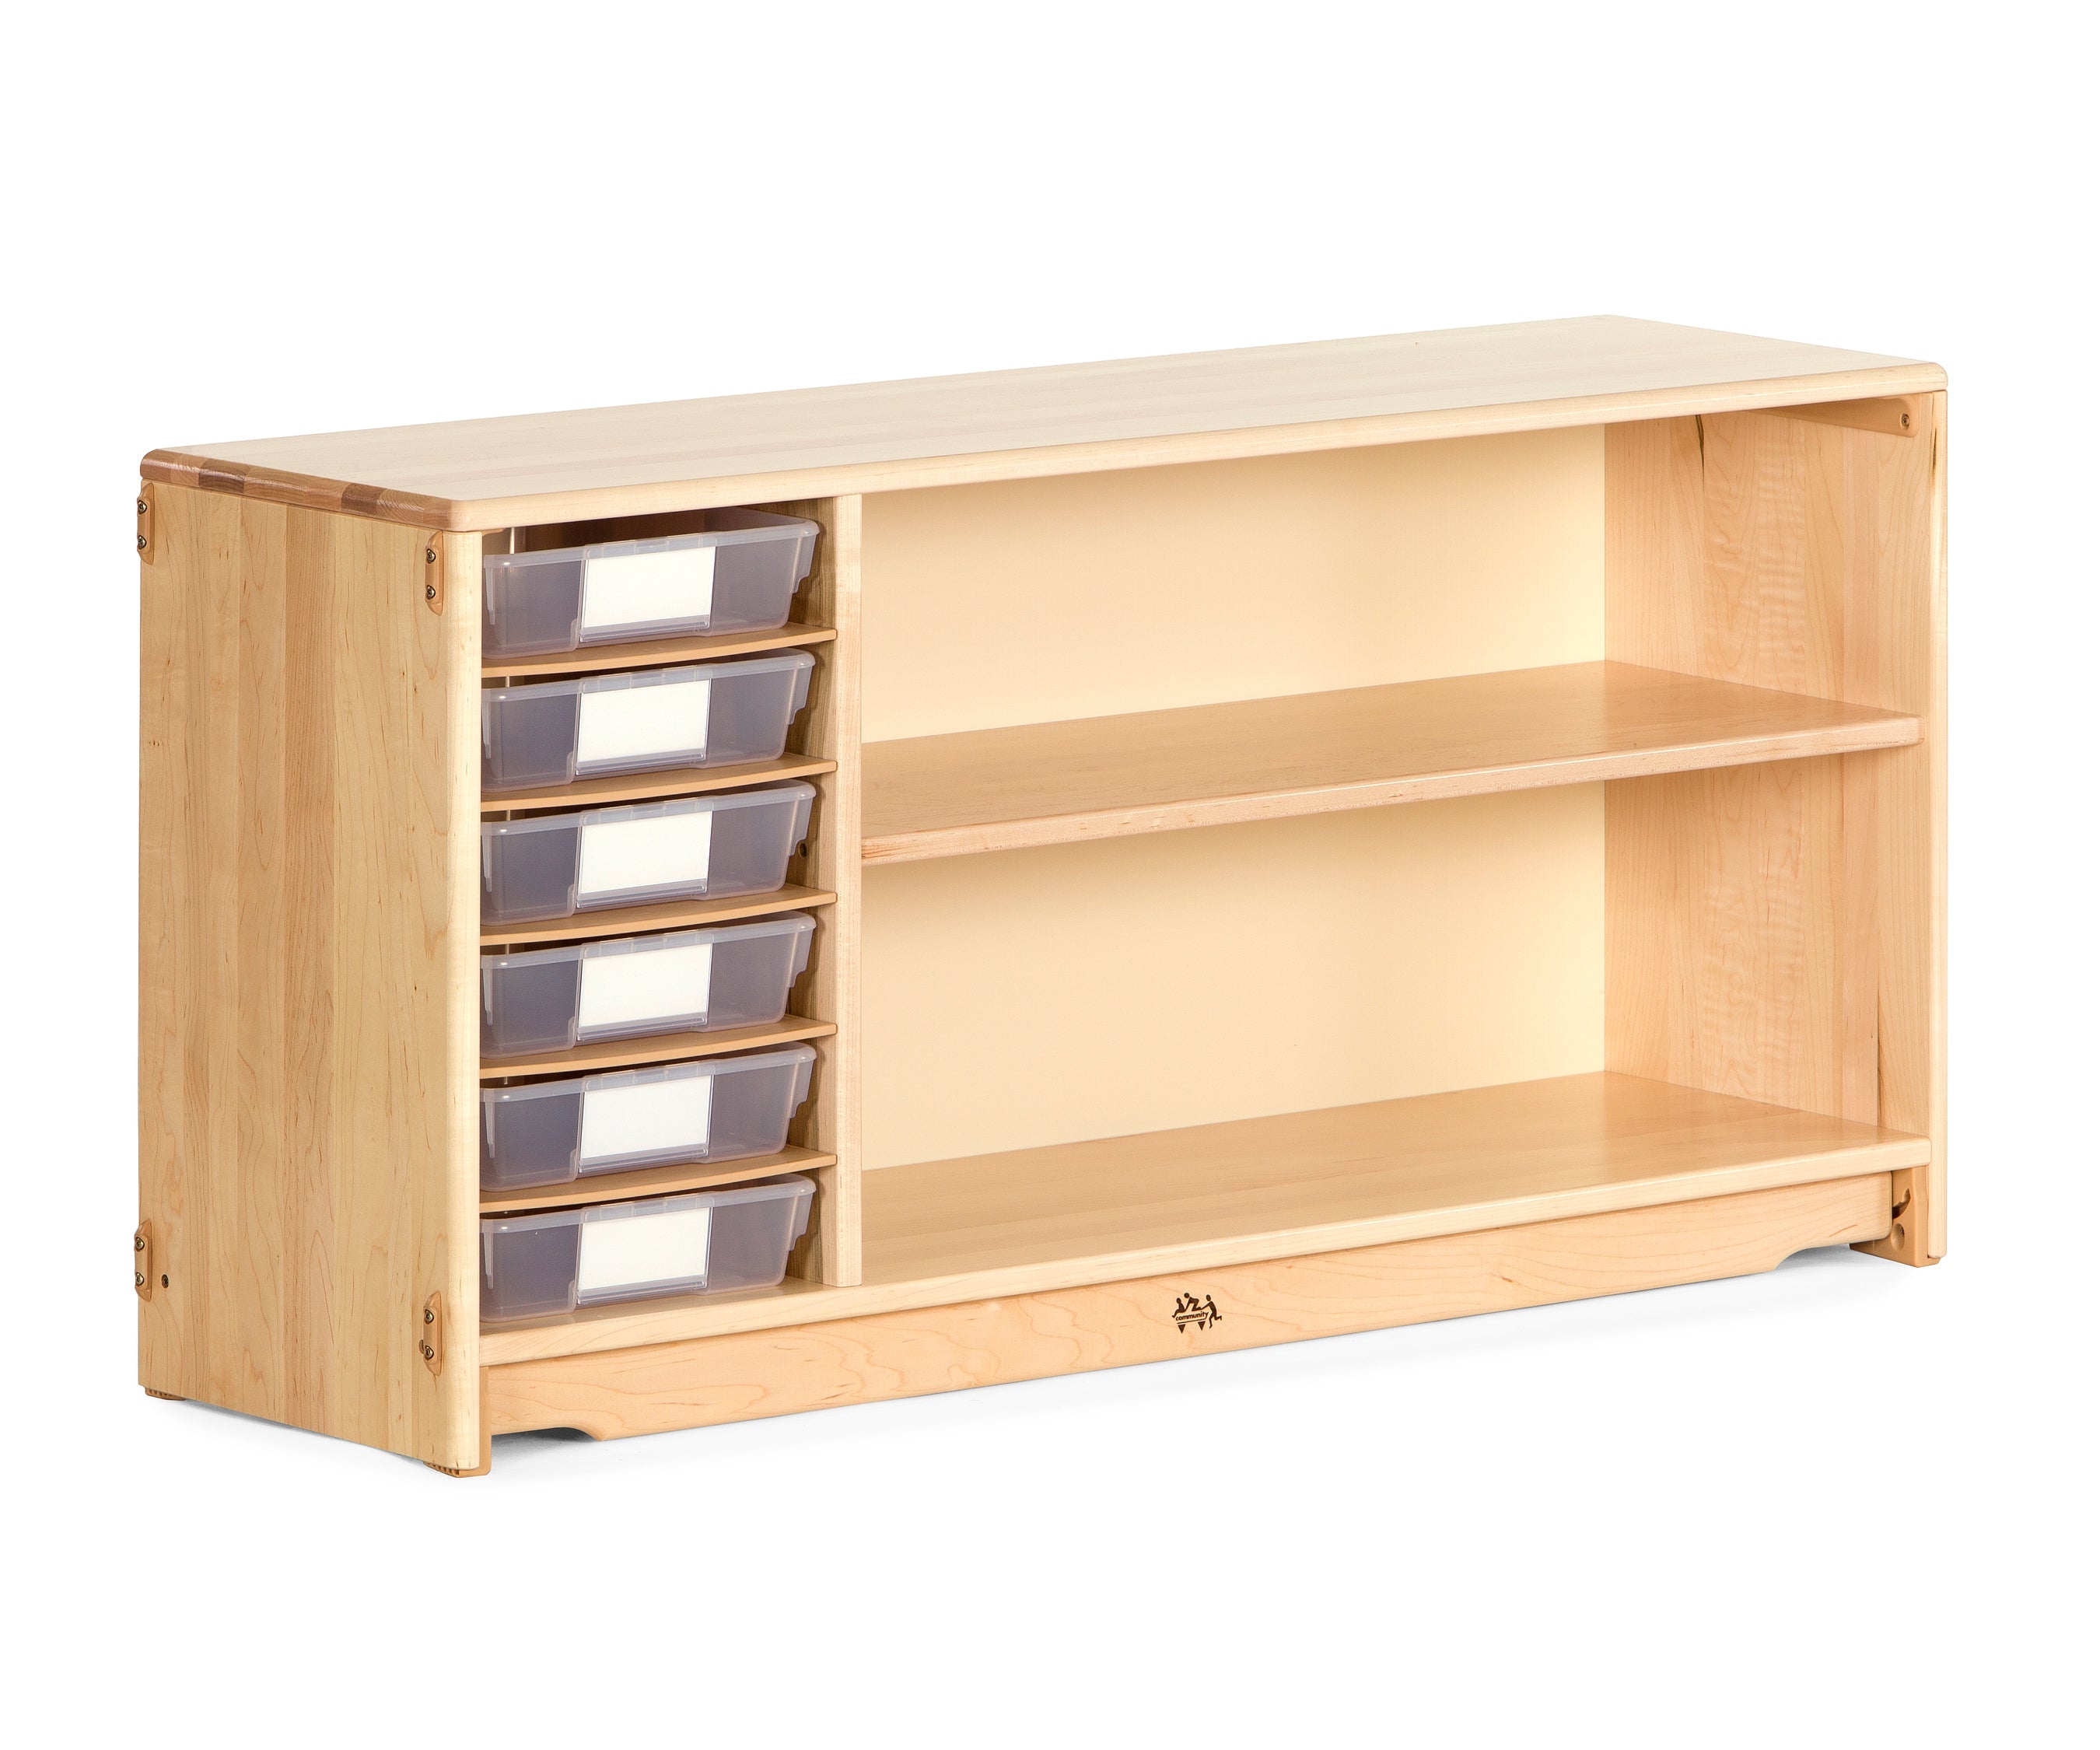 Multi-Storage Shelf 4' W x 24" H with Totes or Baskets by Community Playthings - louisekool